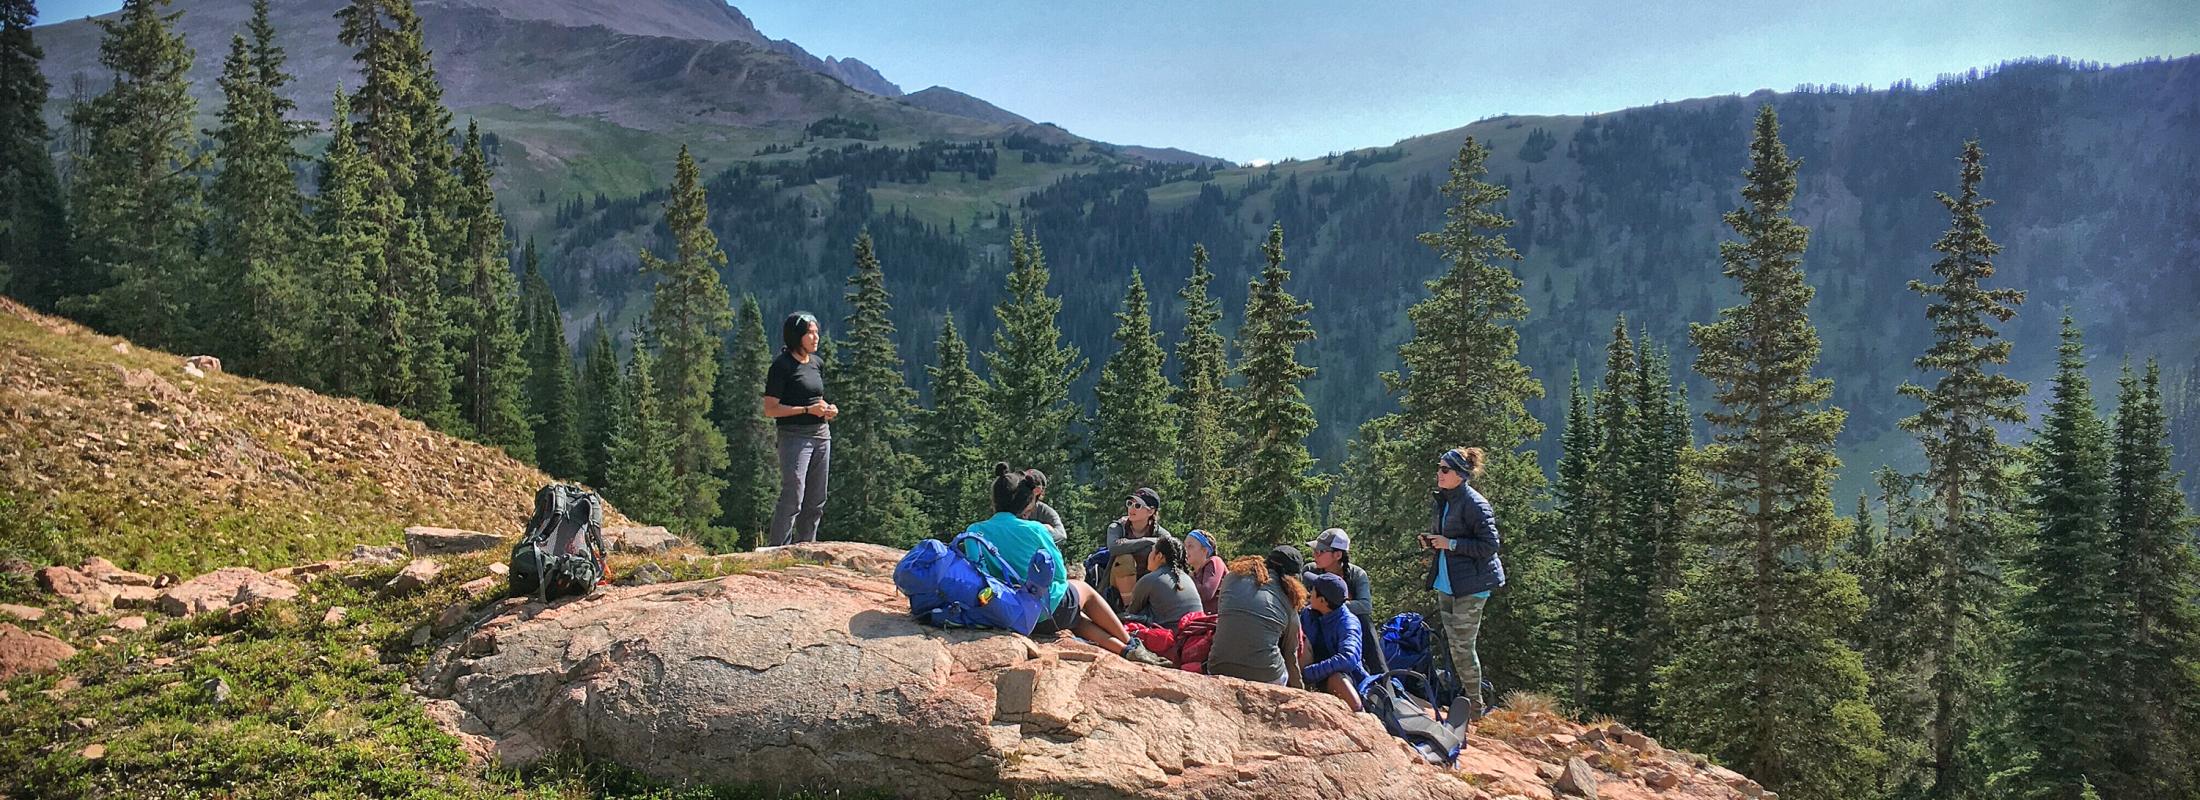 group of students in the mountains